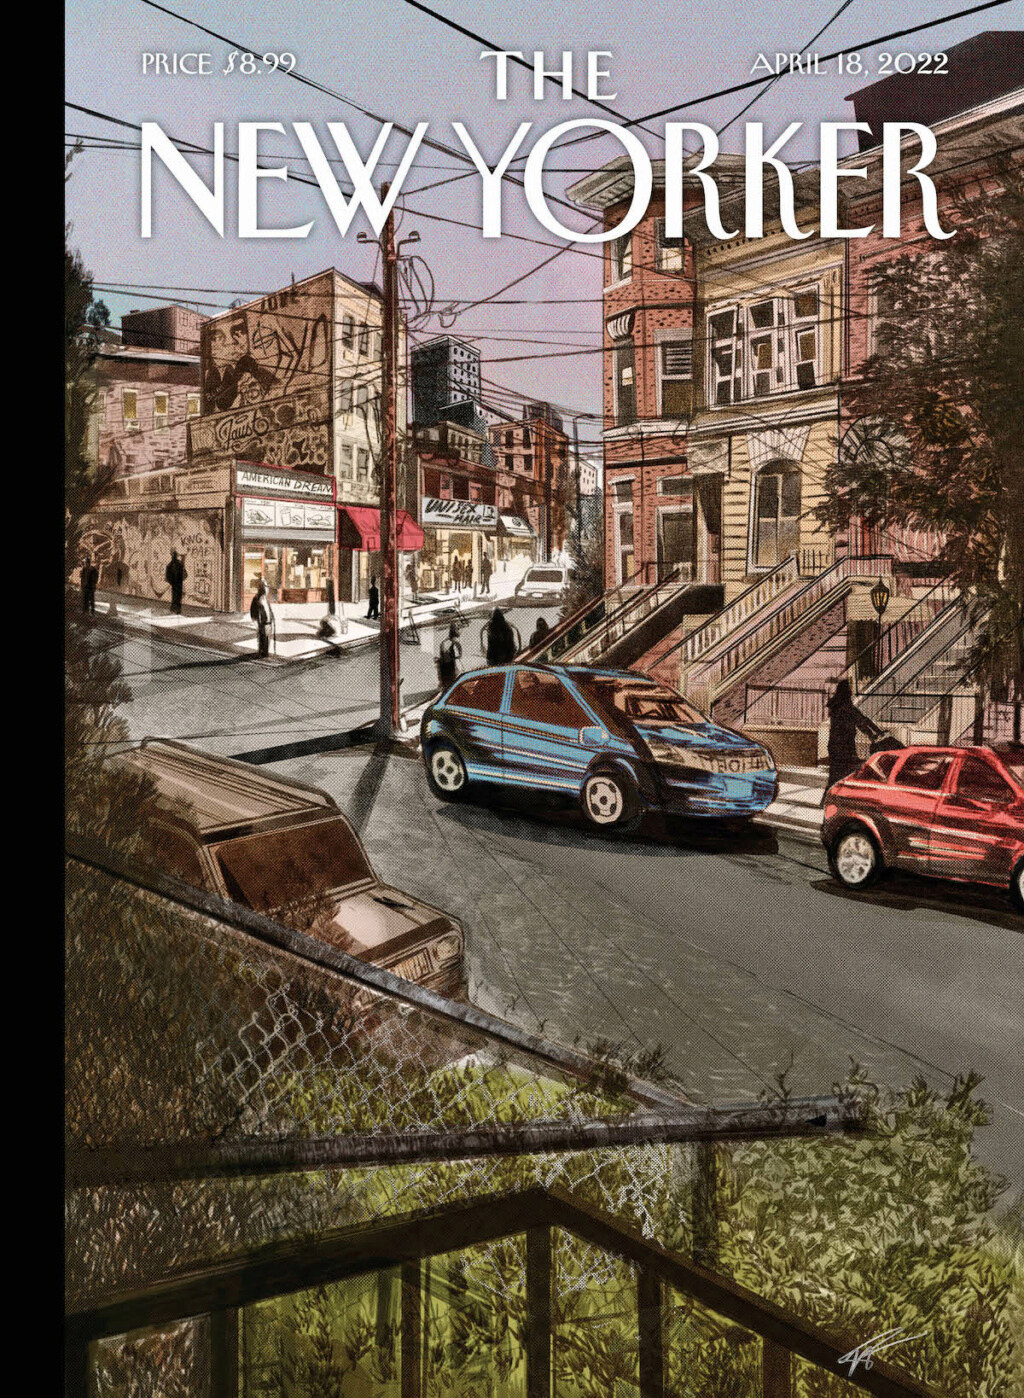 The New Yorker : Les couvertures - Page 3 On_the10